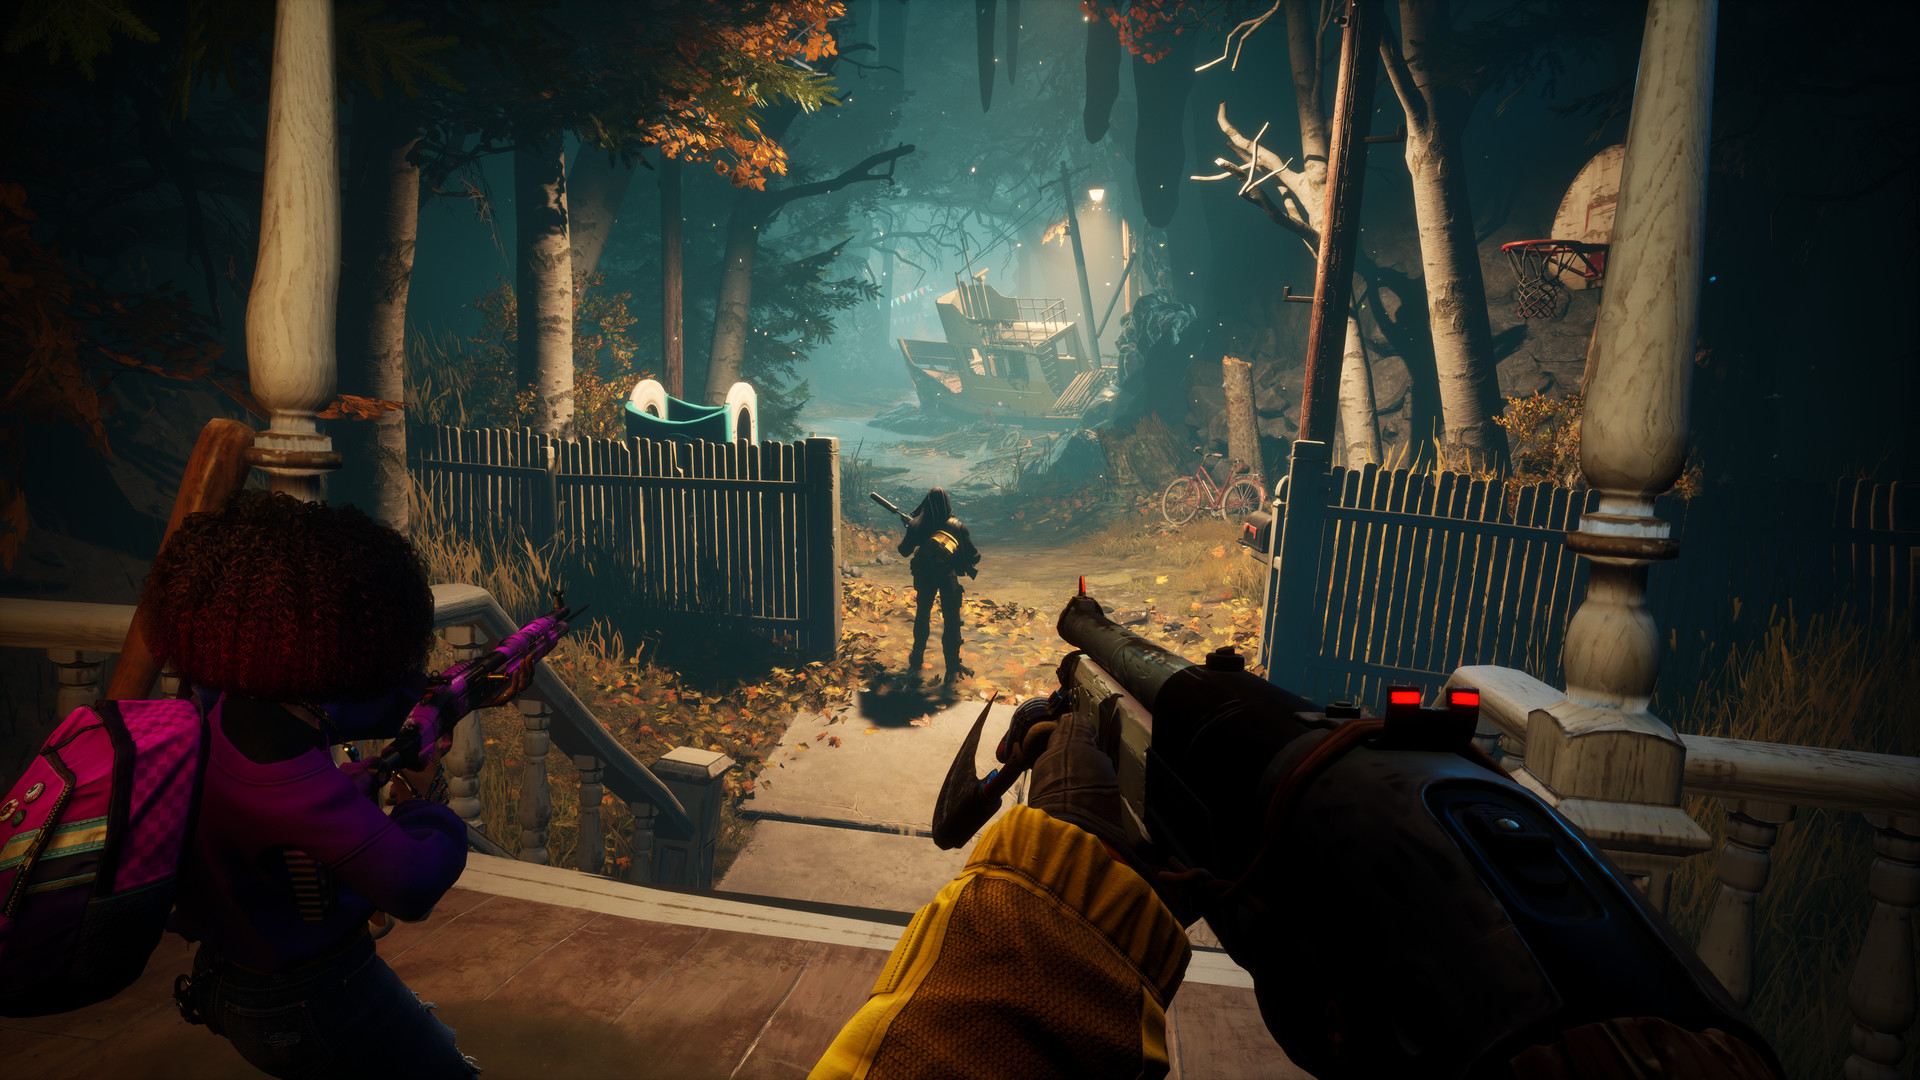 Redfall Game Update 3 Release Notes, Wiki, Gameplay and More - News